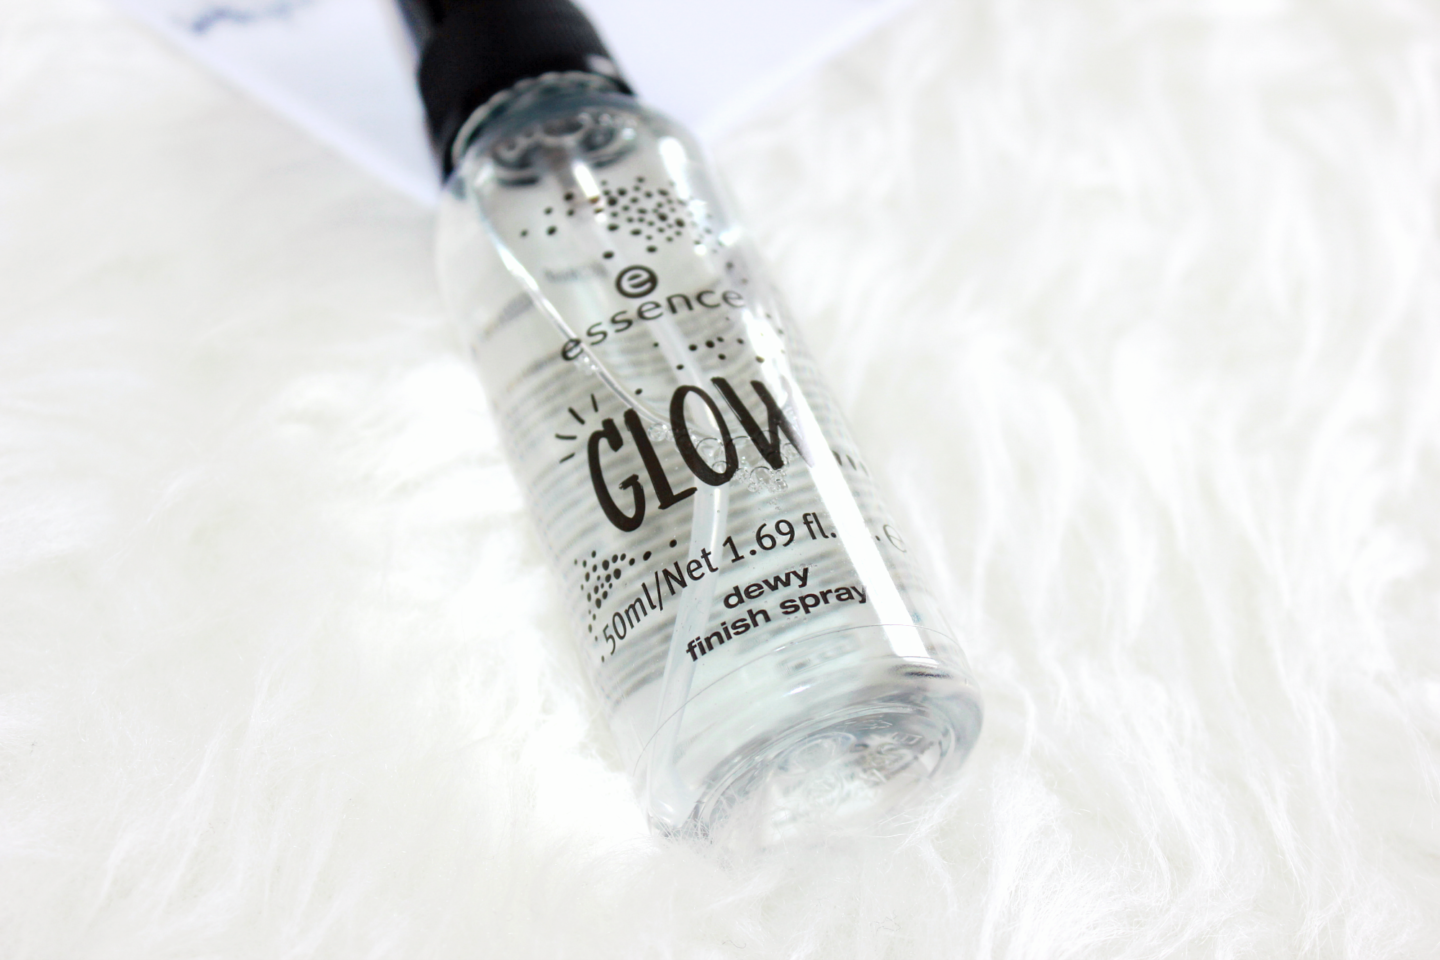 Essence-Glow-Like-Trend-Edition-Review